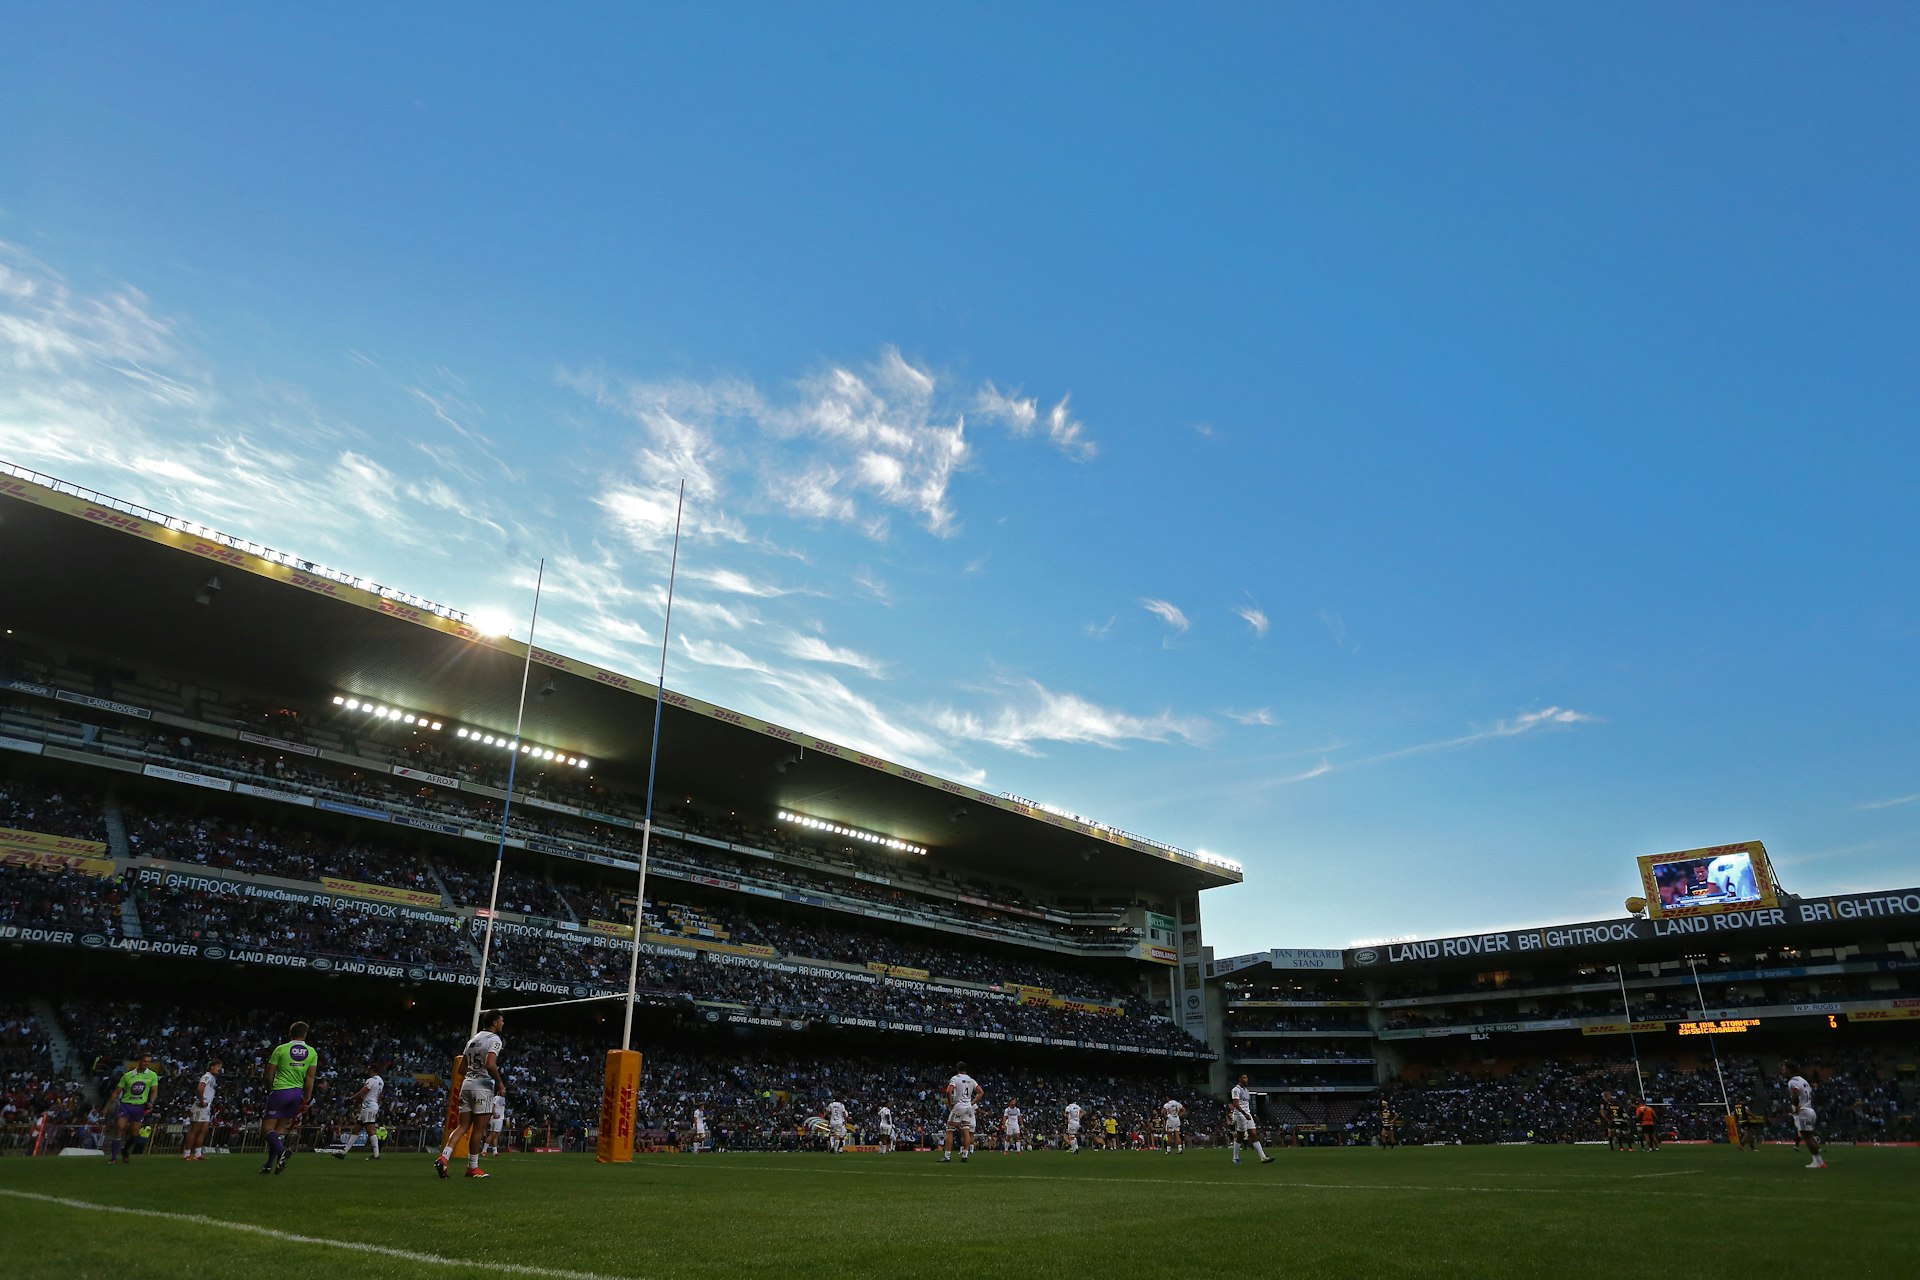 A low-angled view of the Newlands Stadium rugby pitch. A team is out on the field, waiting for the opposition to kick a penalty, while in the background a four-tiered stand is full of supporters.